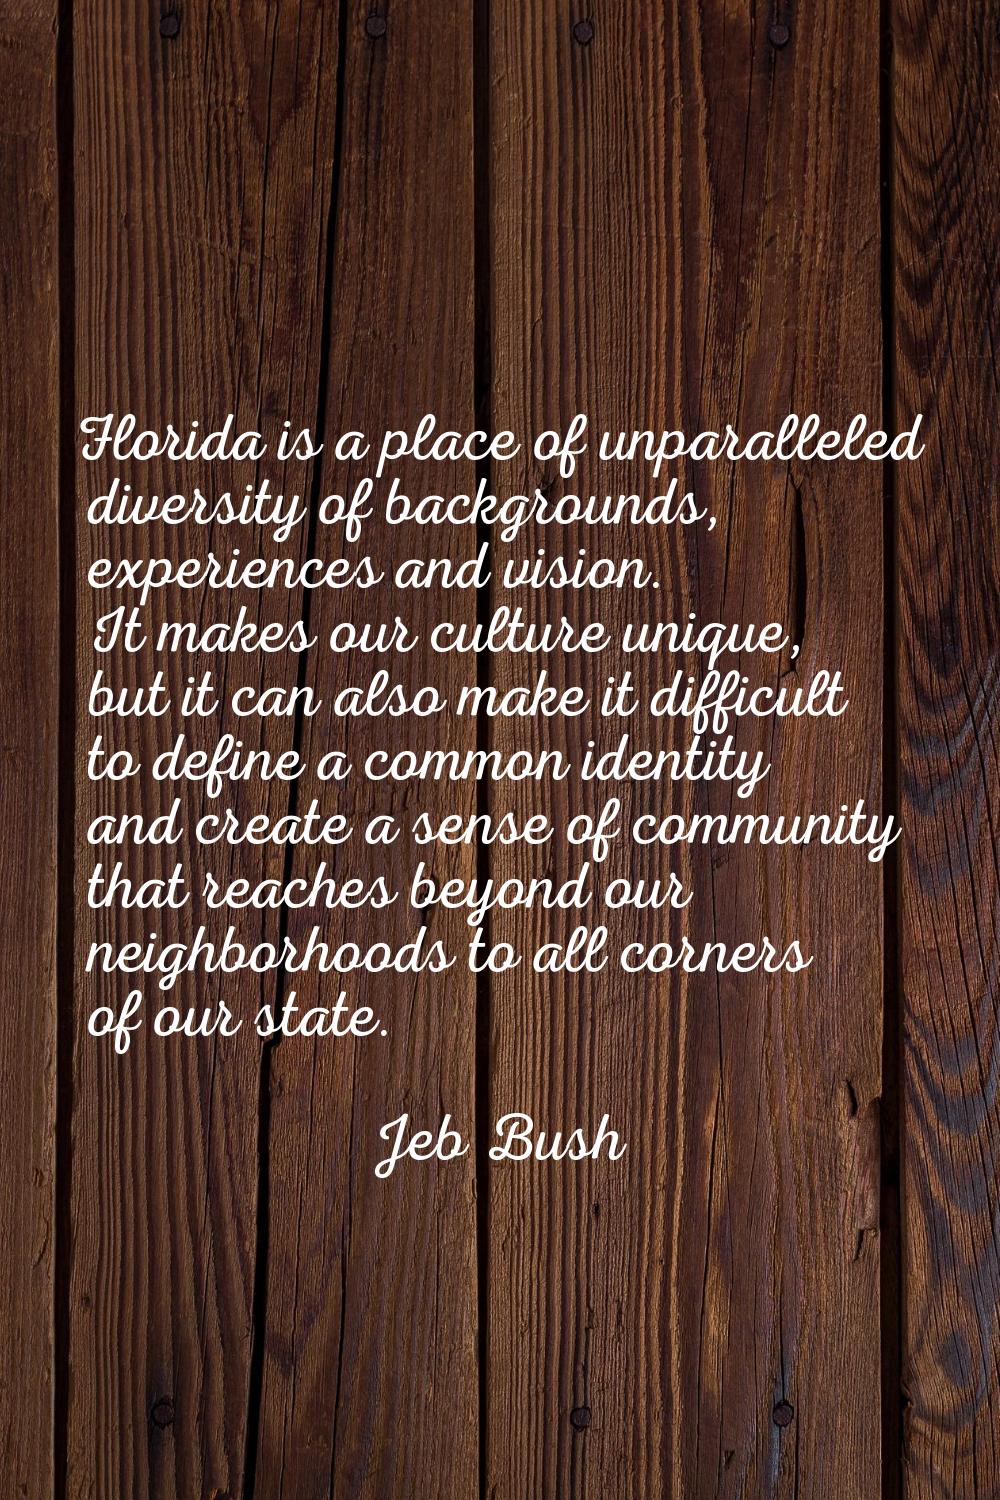 Florida is a place of unparalleled diversity of backgrounds, experiences and vision. It makes our c